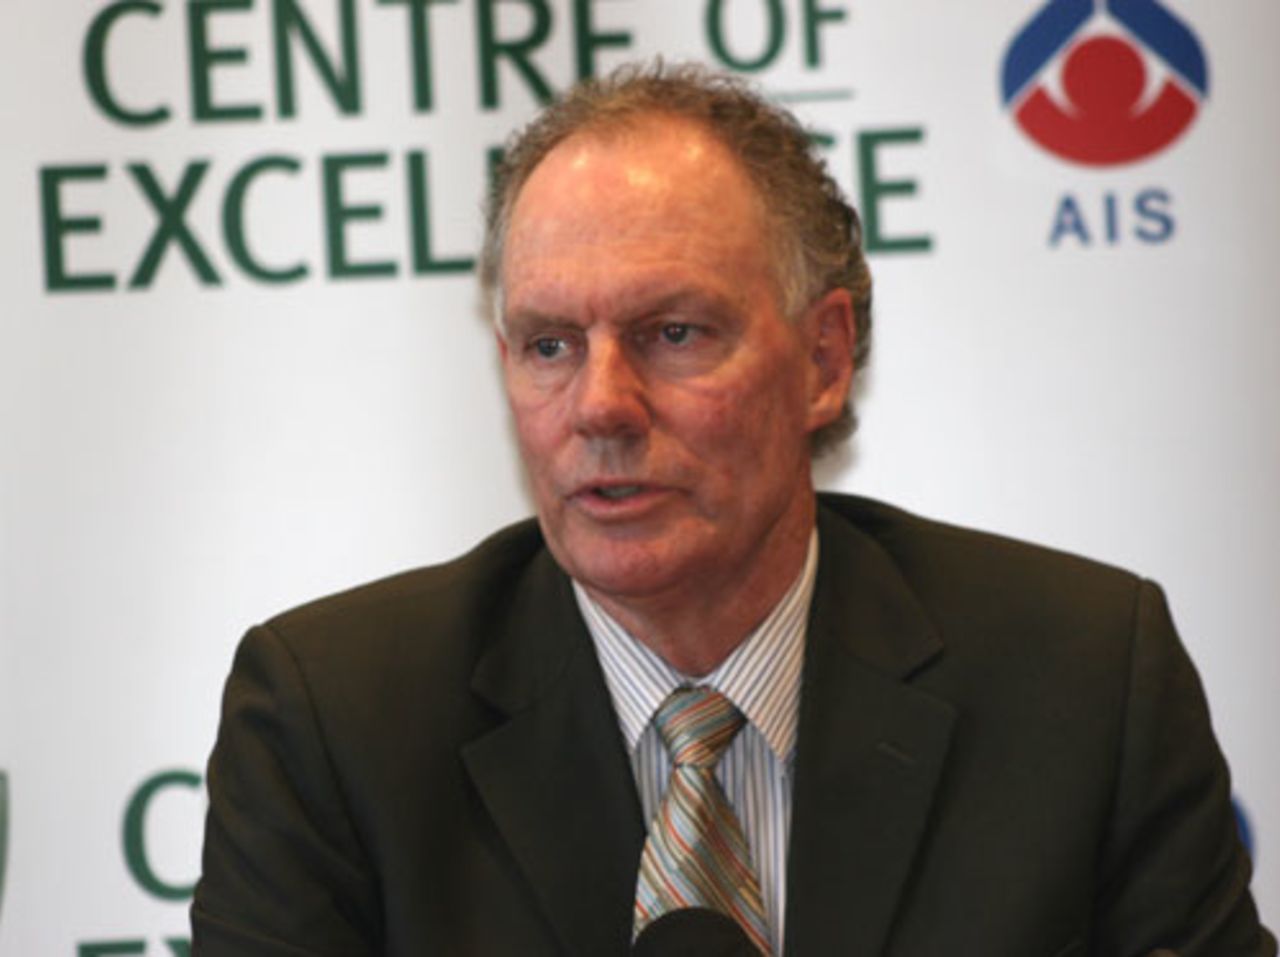 Greg Chappell accepts the job as the head coach of the Australian Centre of Excellence, Melbourne, September 3